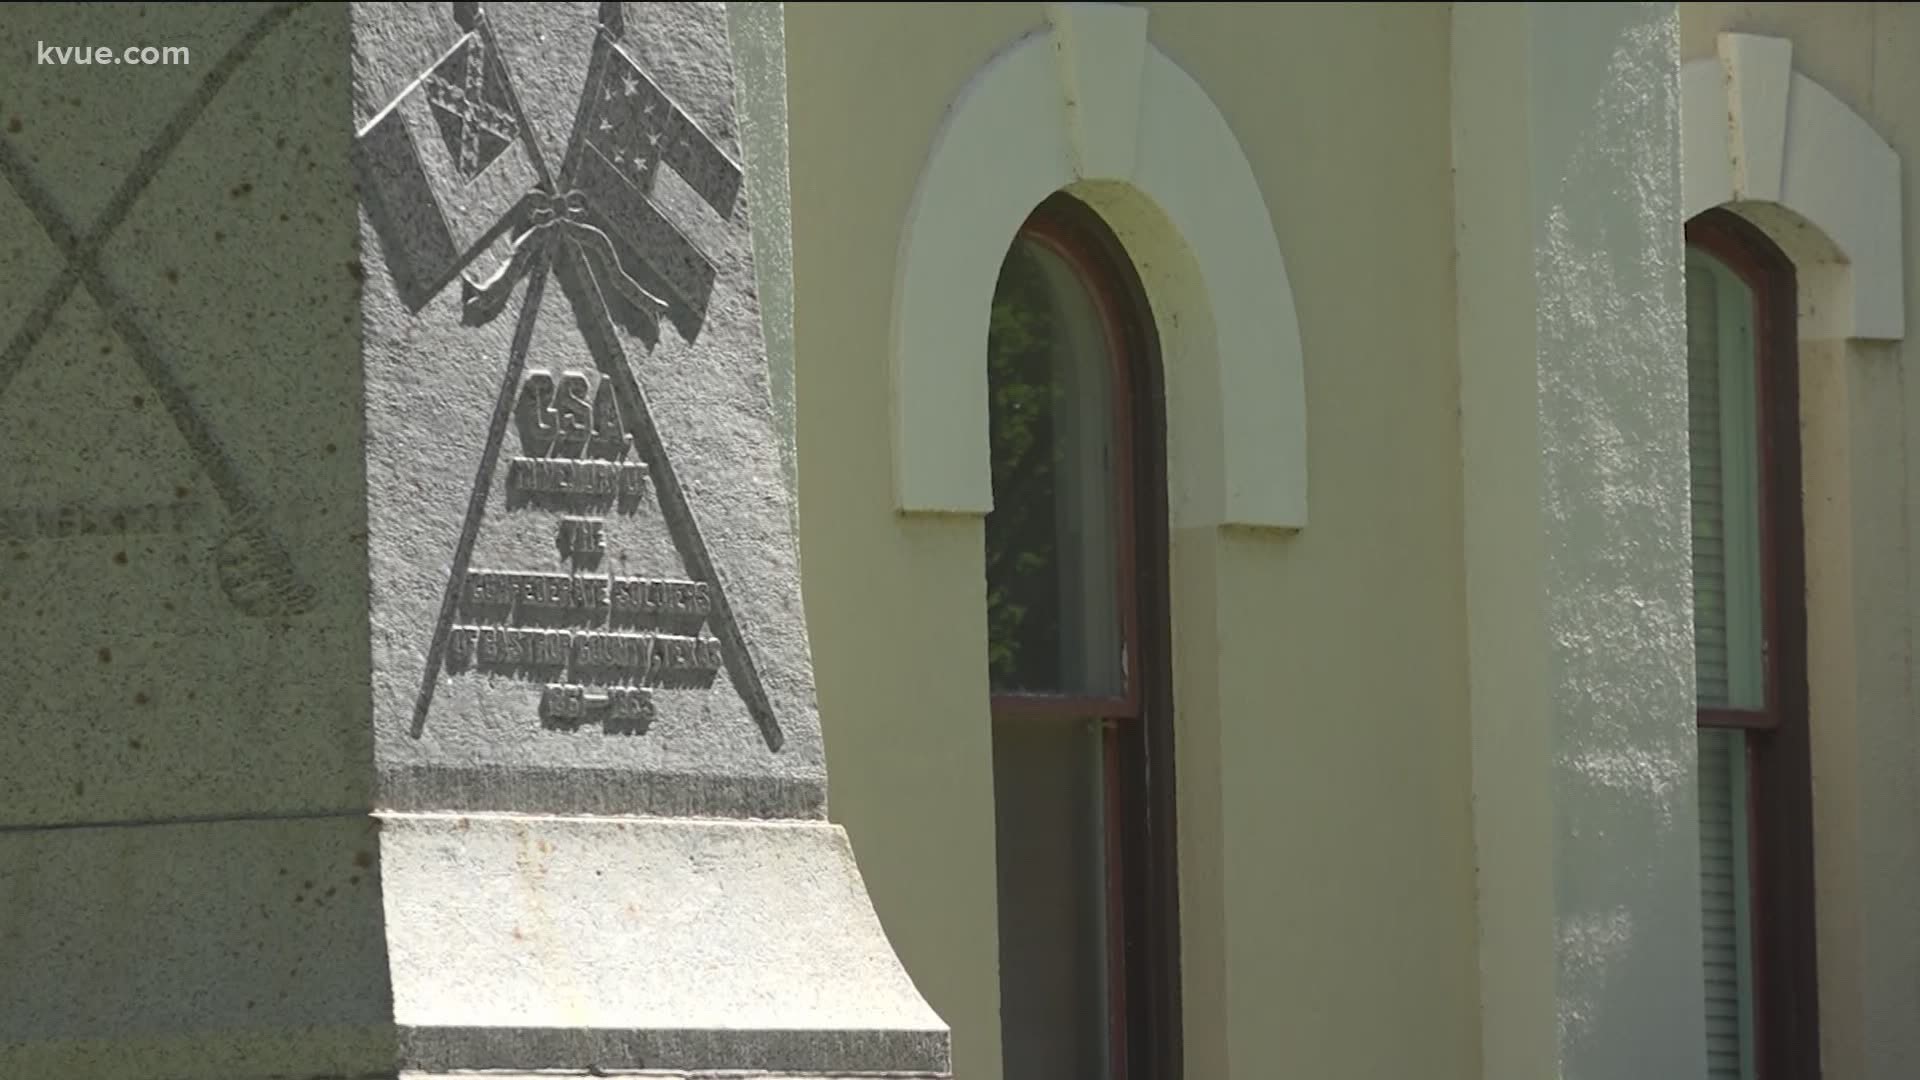 Confederate monuments outside the Bastrop County Courthouse are coming down. Luis de Leon tells us how soon the monuments could be moved.